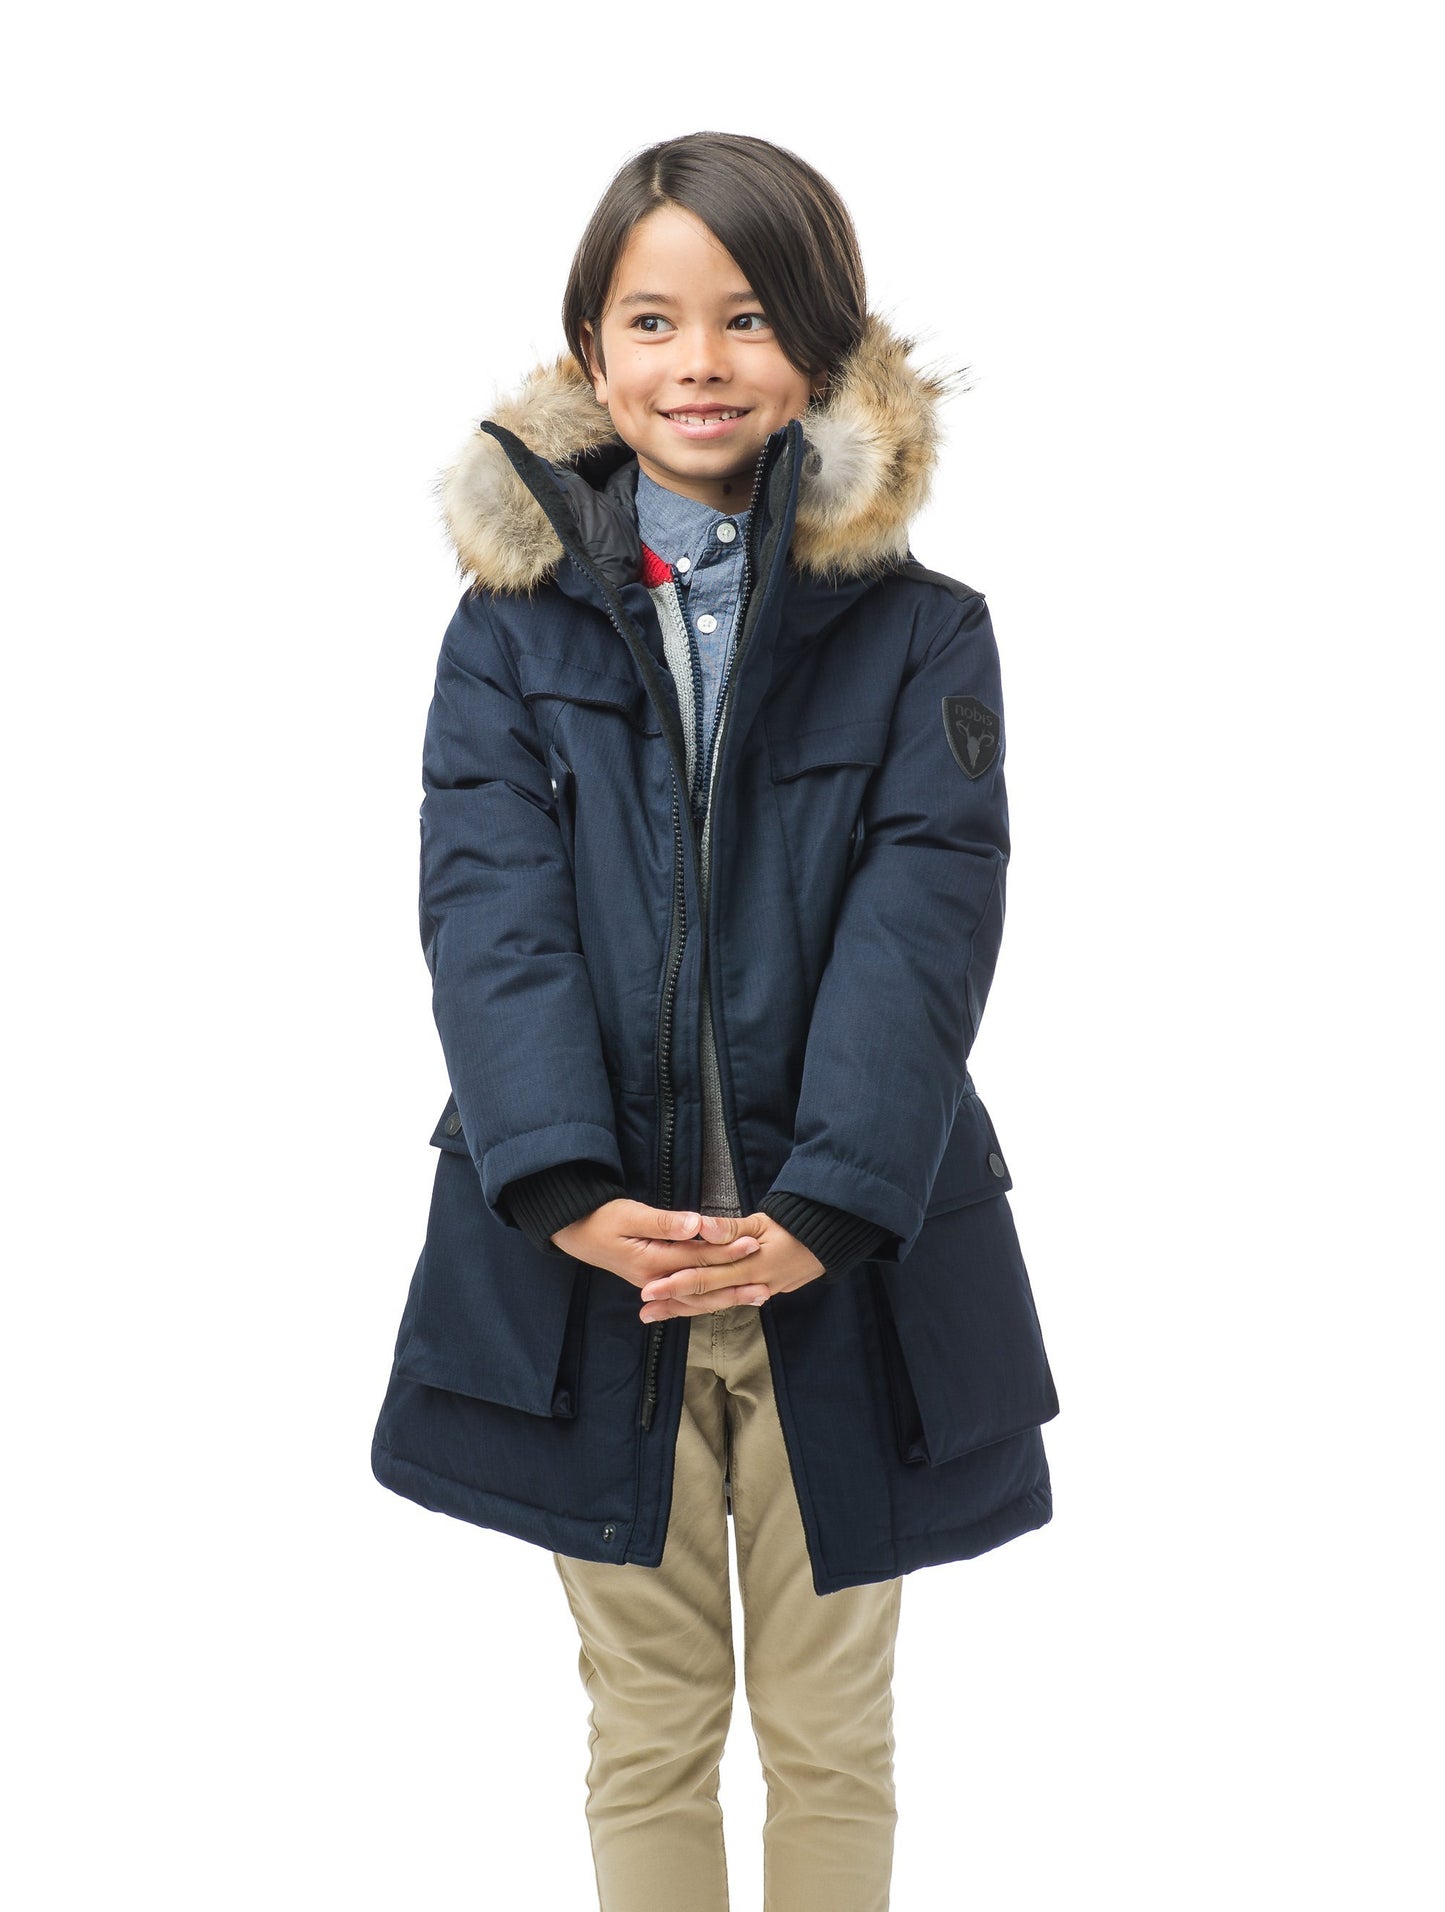 The best kid's down filled parka that's machine washable, waterproof, windproof and breathable in CH Navy